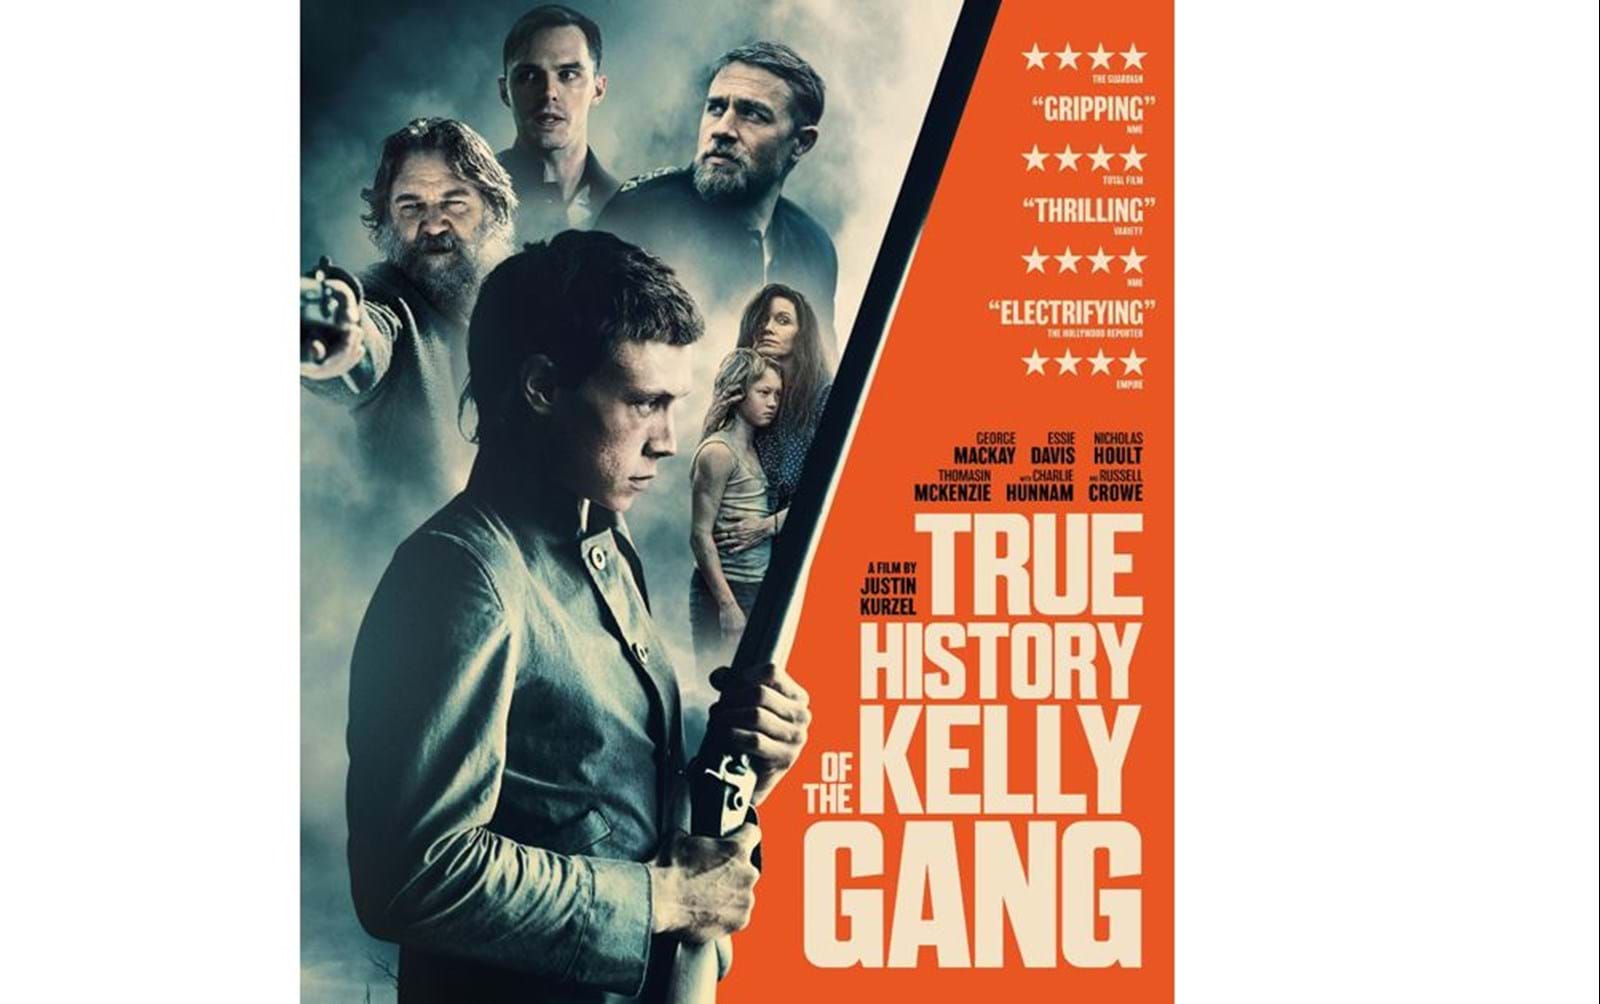 Daybreak Pictures' True History of the Kelly Gang is out released in UK cinemas today